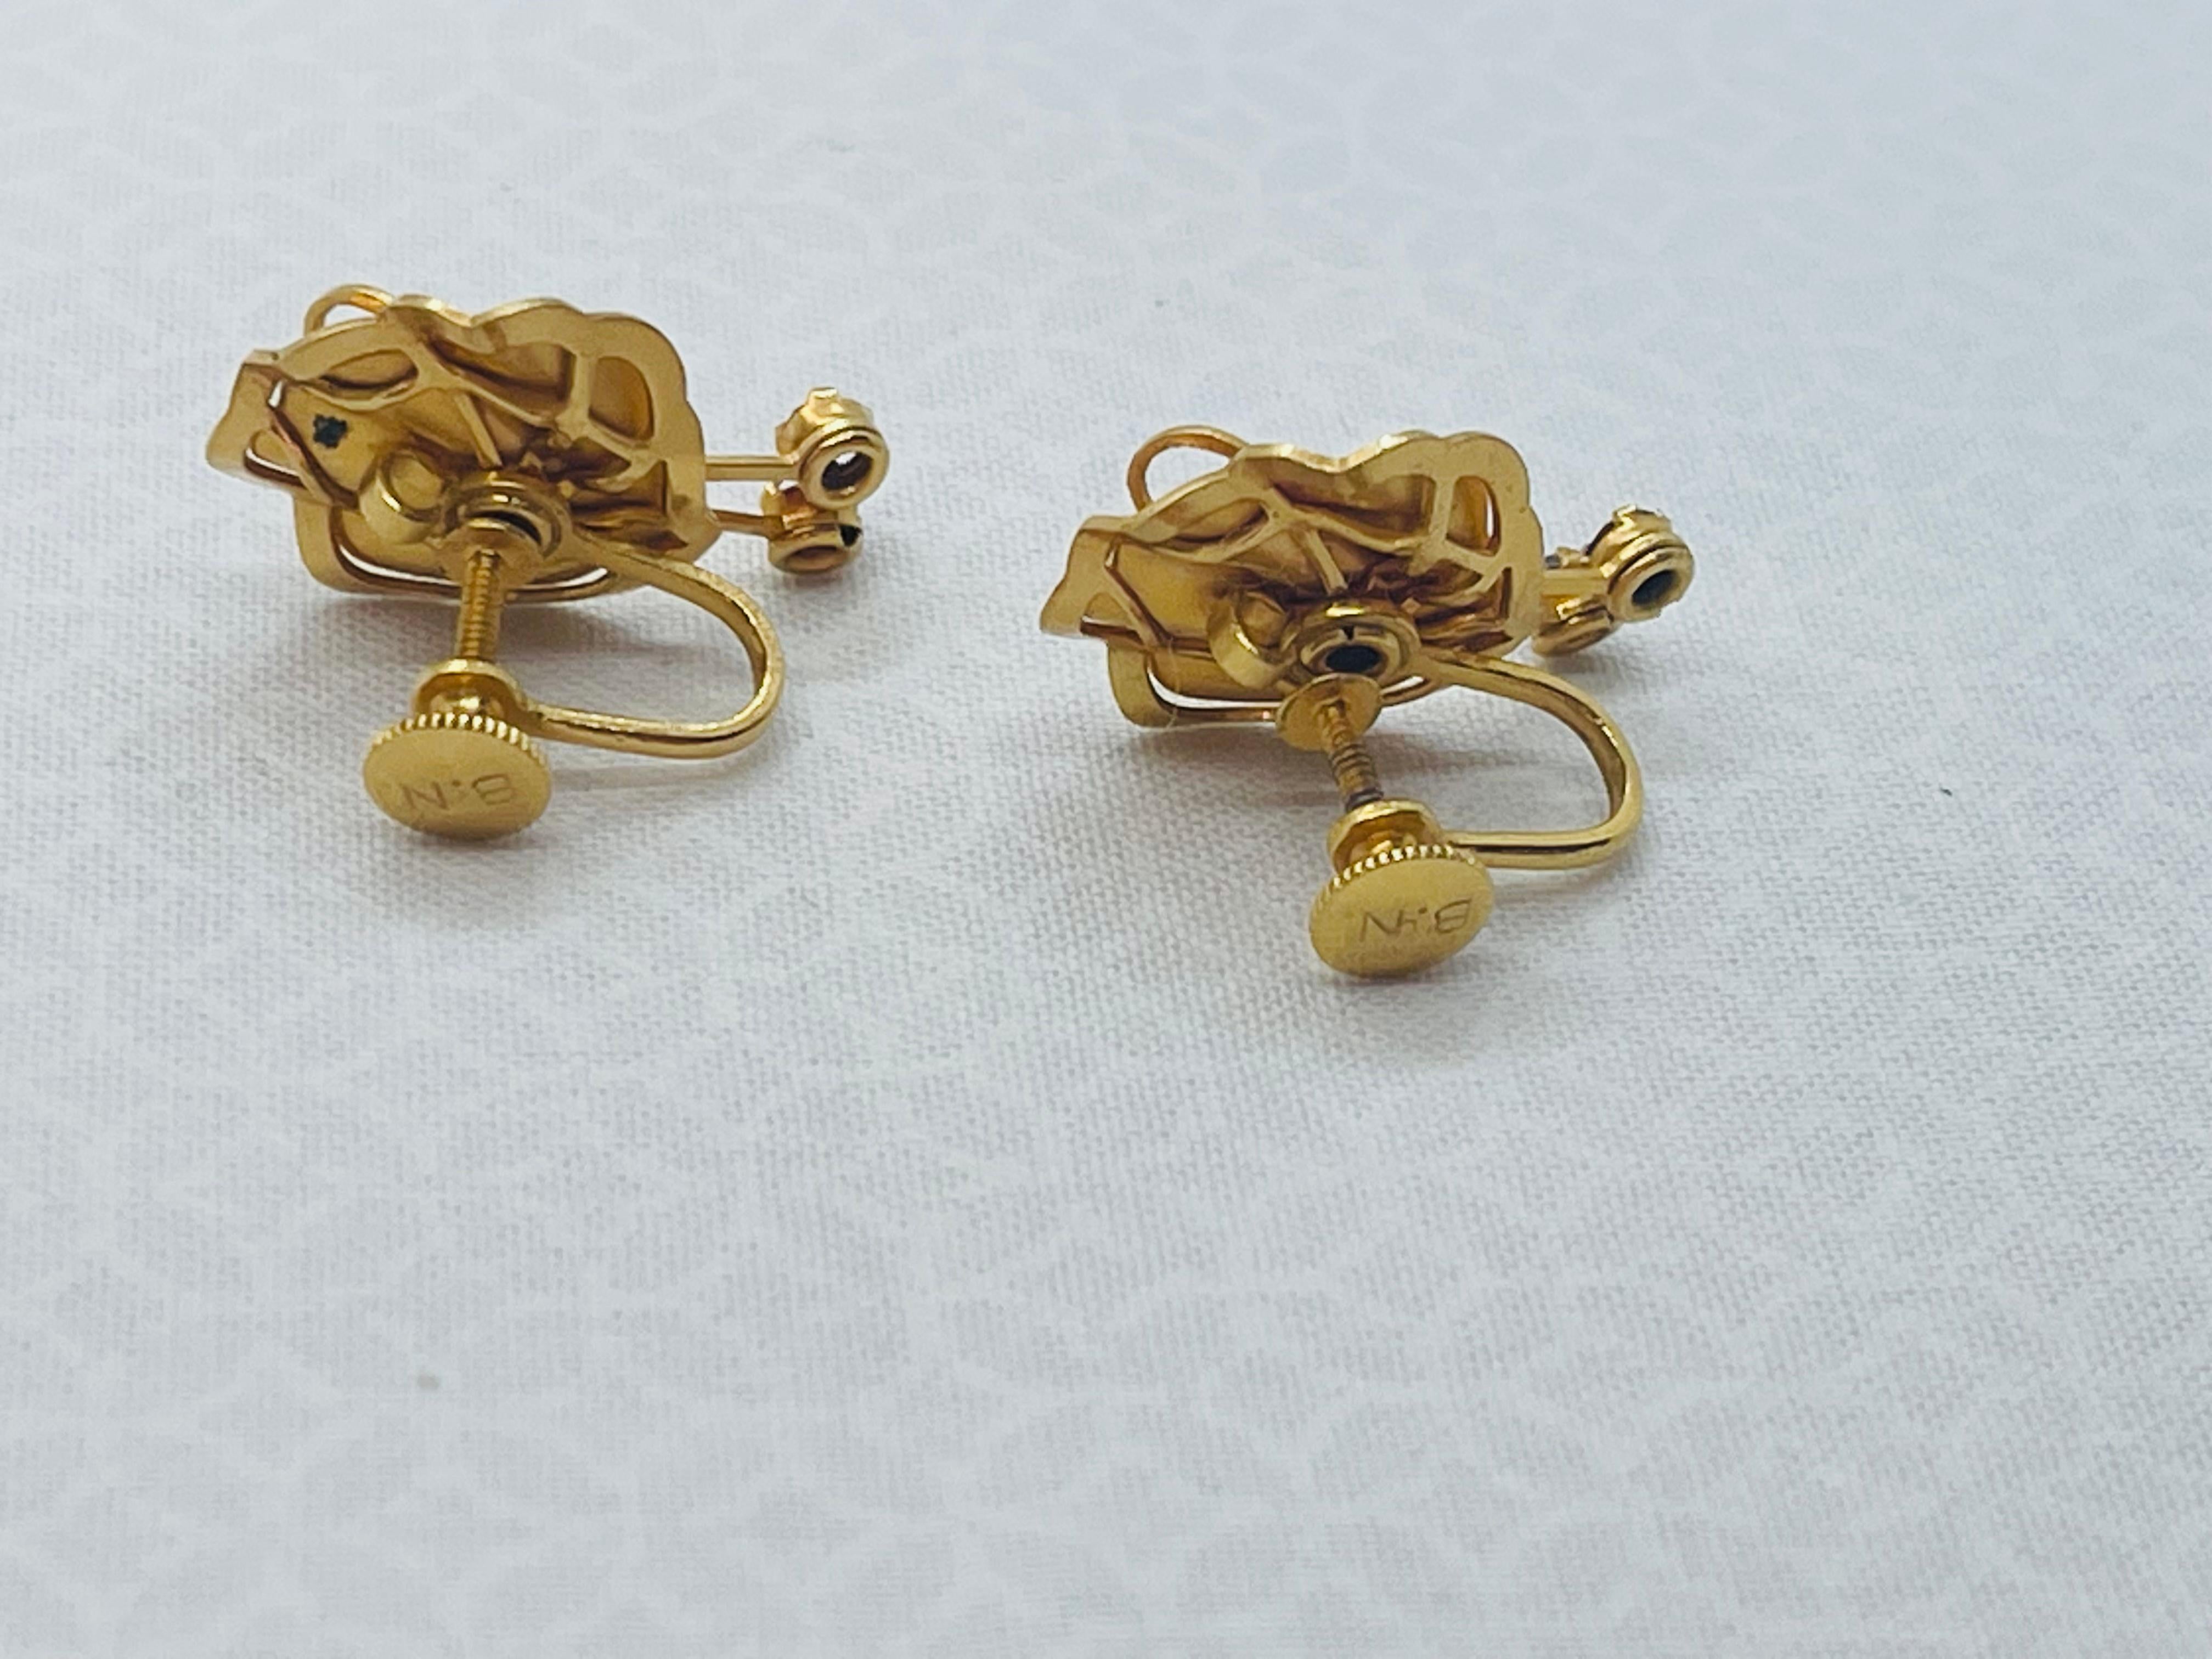 Bugbee & Niles Matching Earrings and Brooch Set Circa. 1955s - 1959 For Sale 2